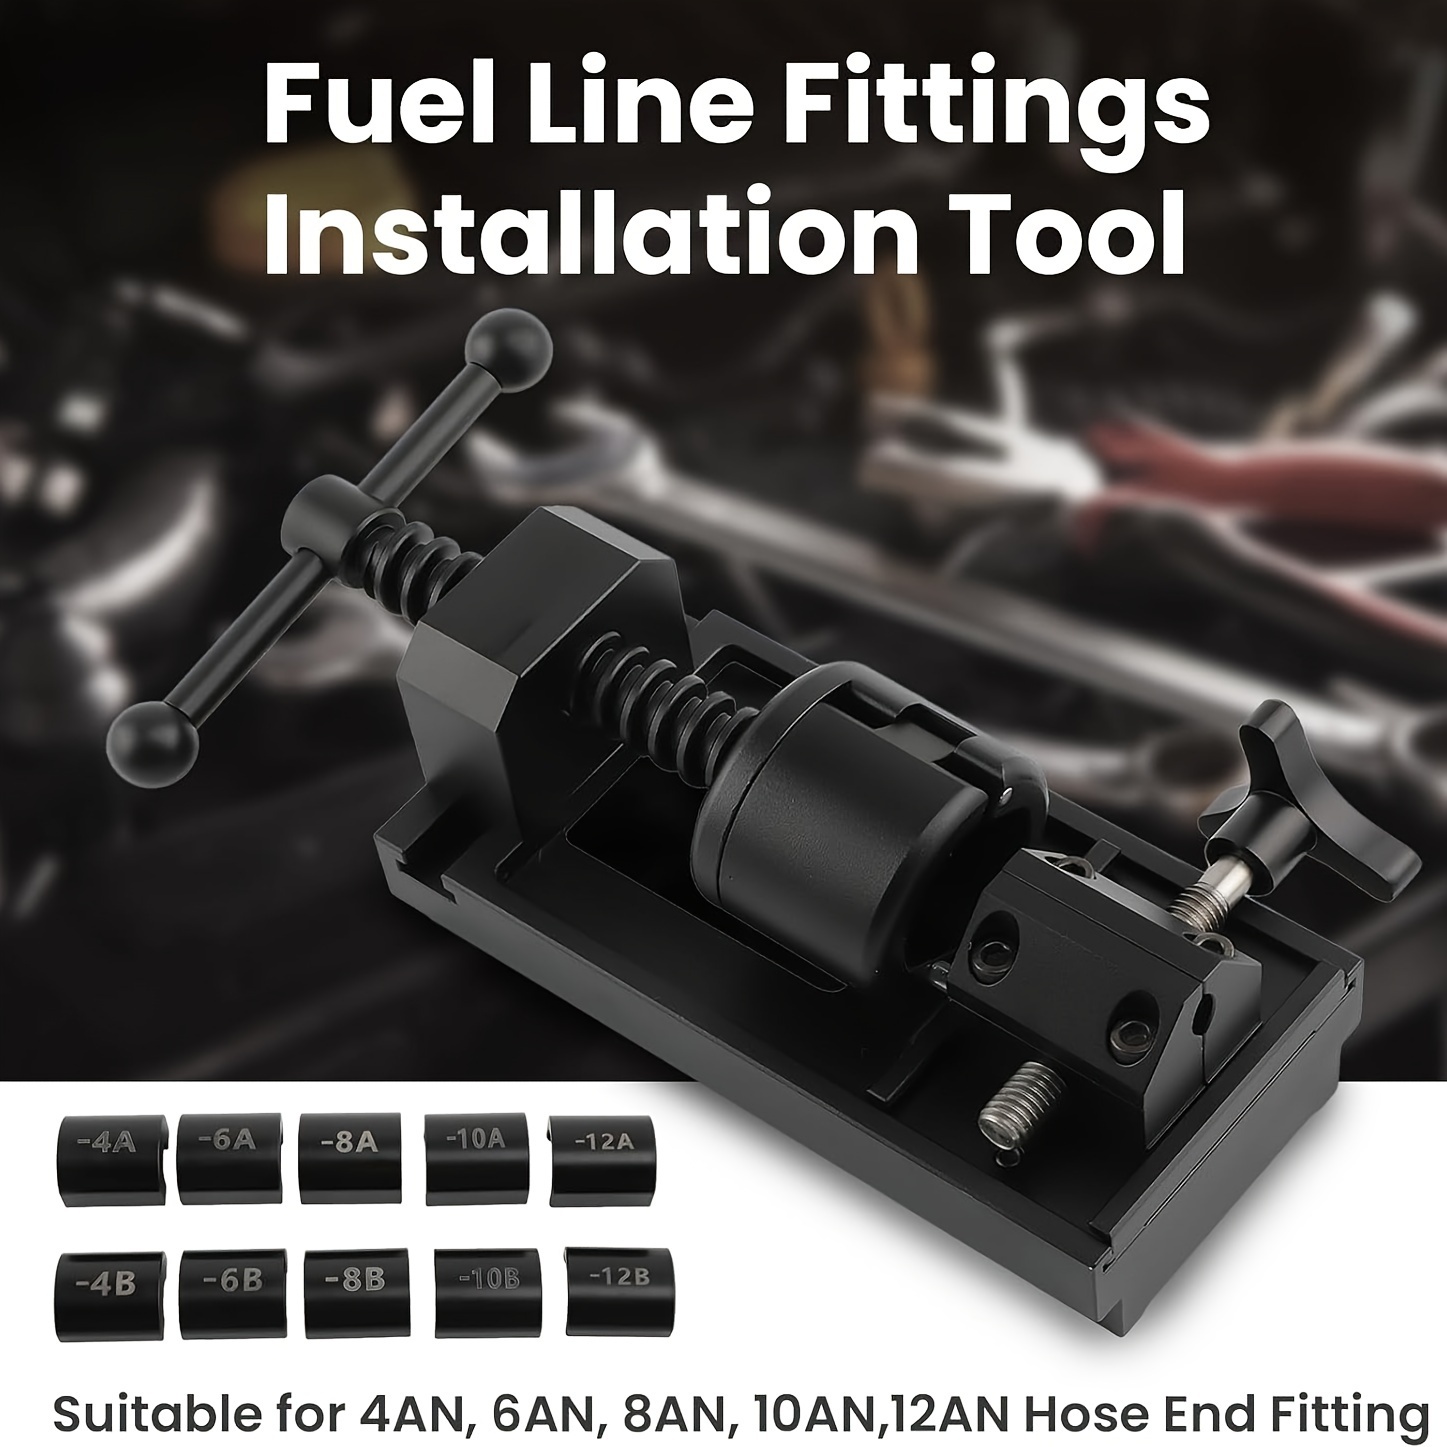 

Fuel Line Fittings Installation Tool, Fuel Hose Connect Tool Kit, For 4an 6an 8an 10an 12an Connector Installation Us